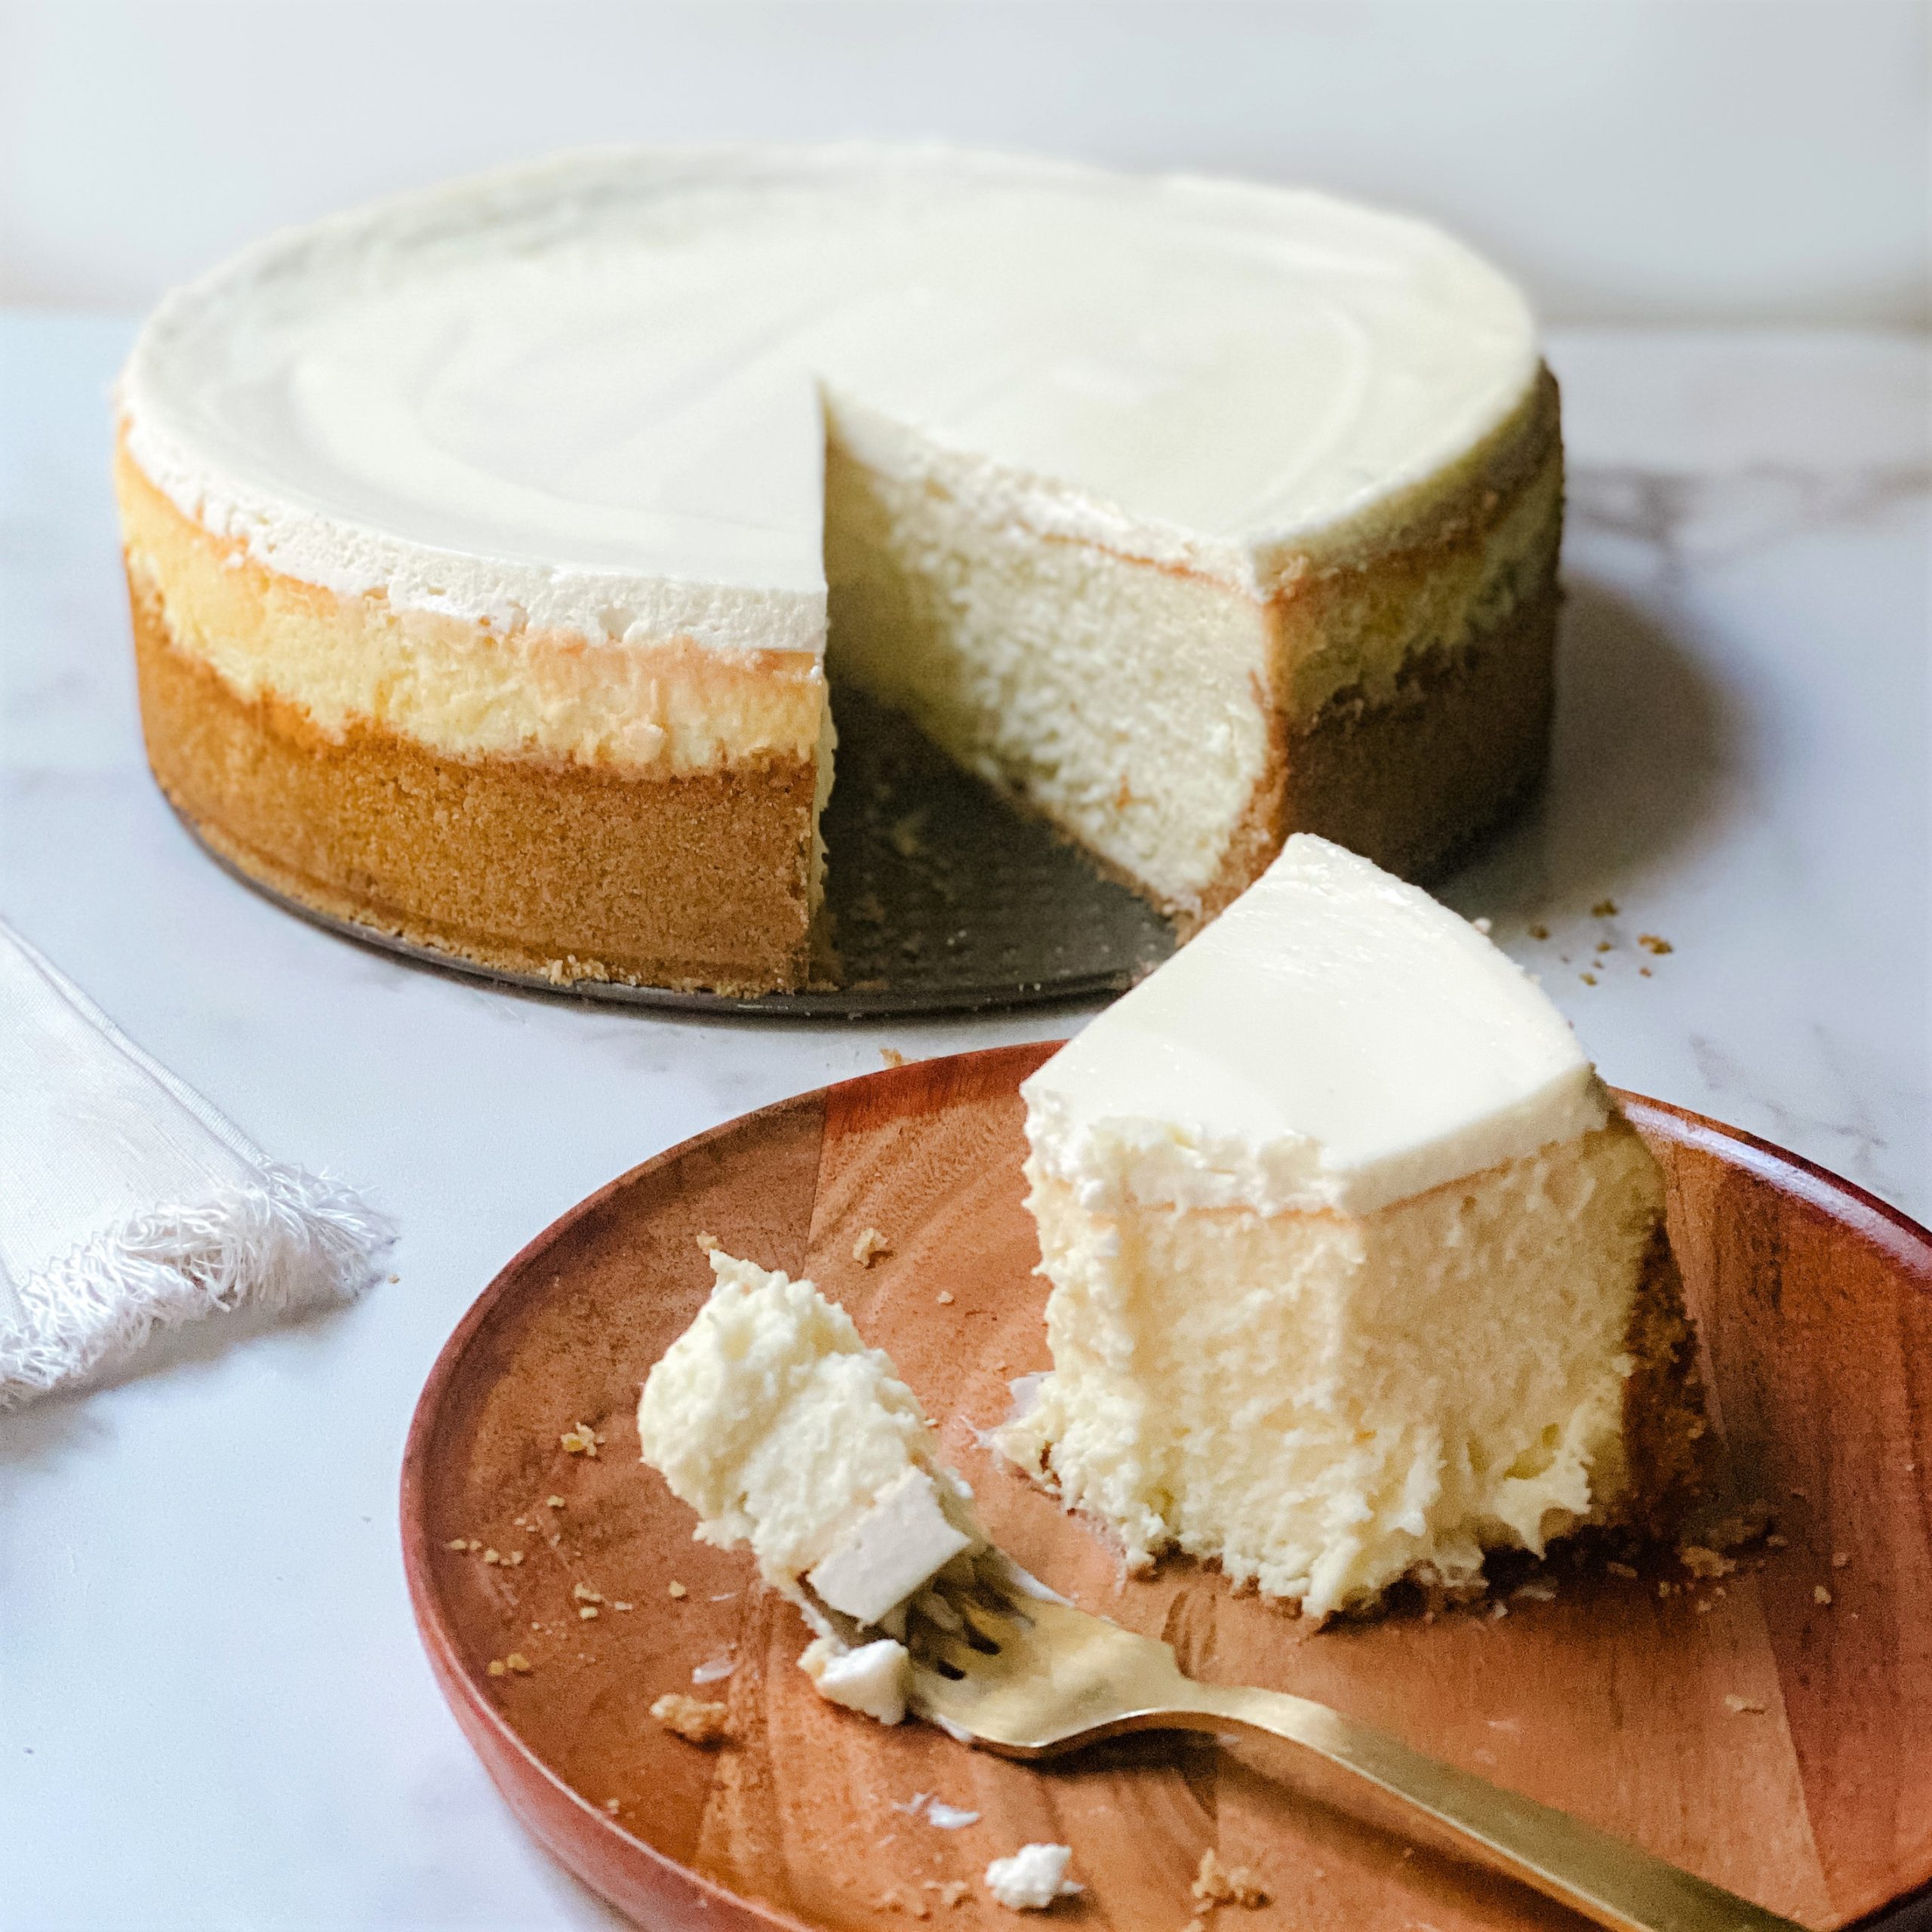 https://plumstreetcollective.com/wp-content/uploads/2020/08/Easiest-Creamy-Cheesecake-1-scaled.jpg